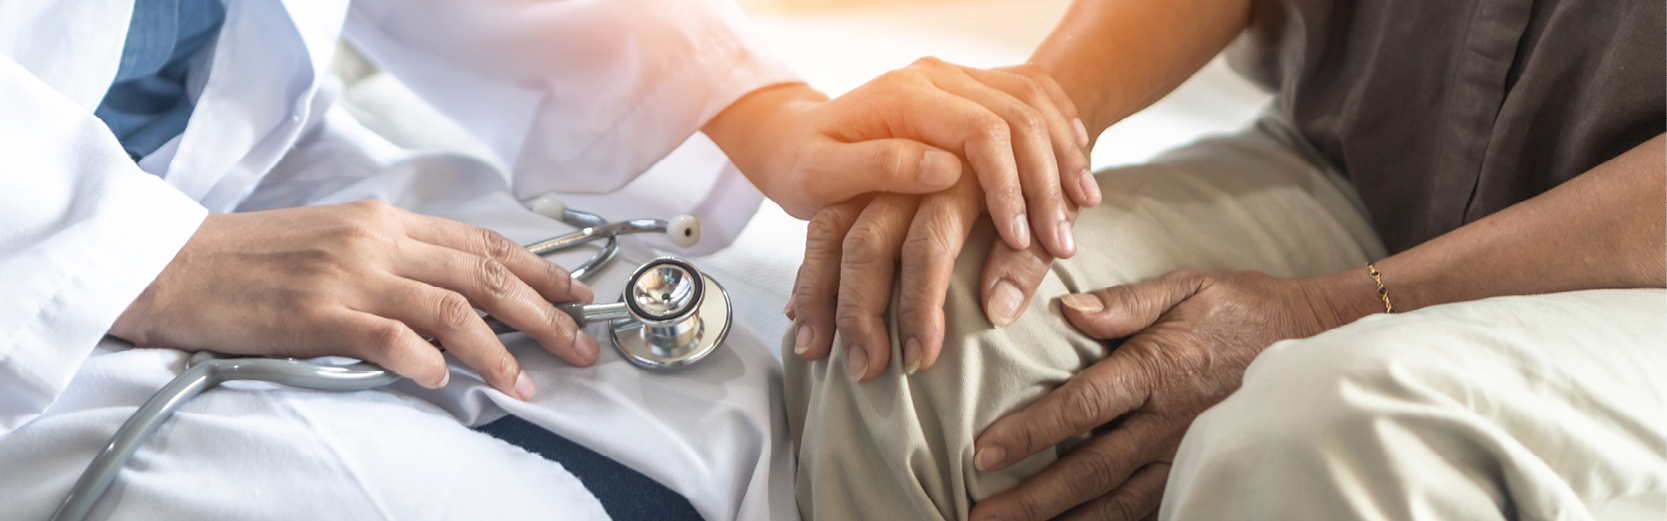 Hand of a doctor holding patient hand comforting them